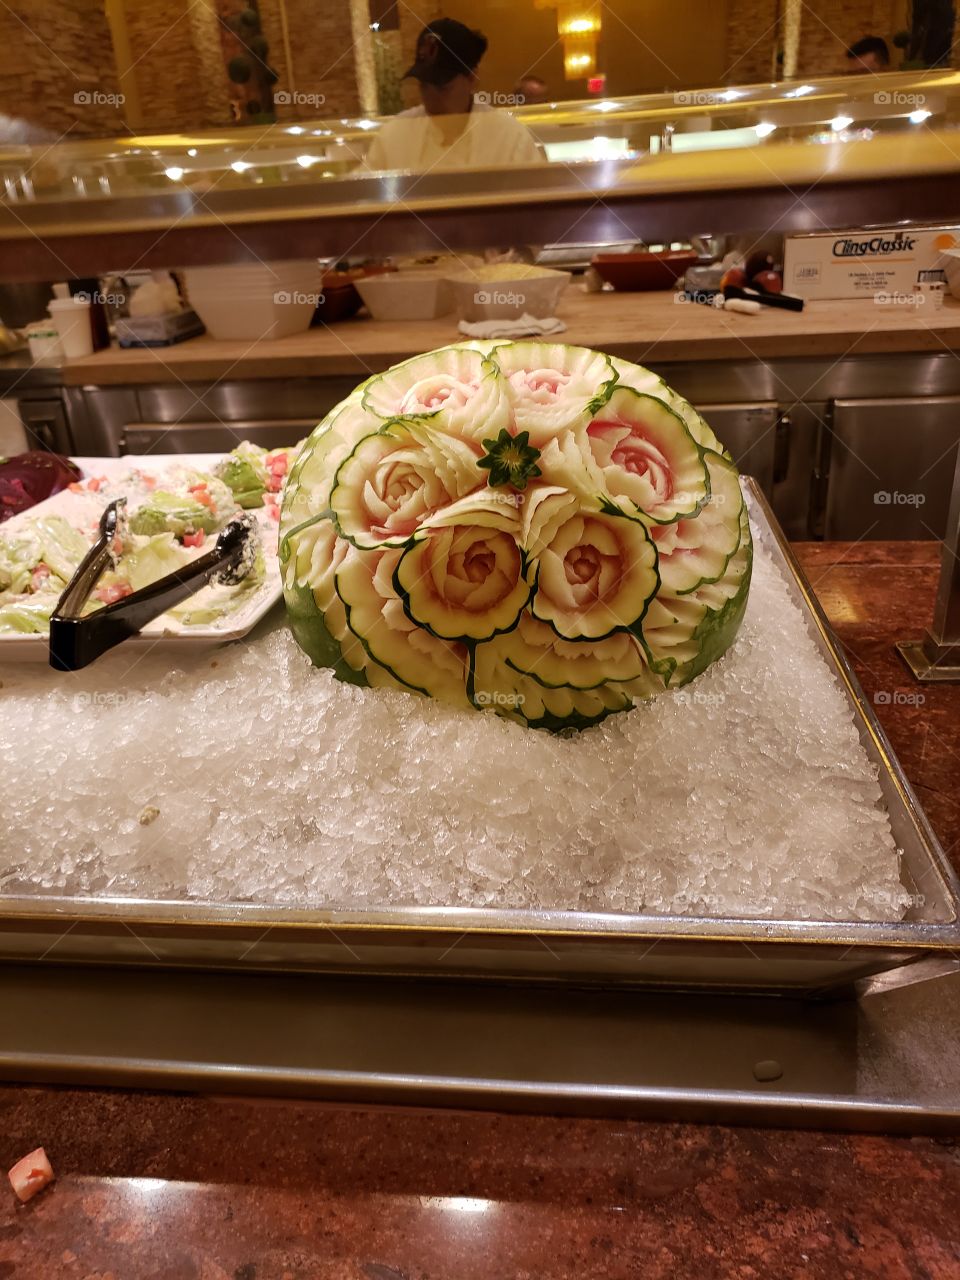 Beautiful carved Watermelon created by Chef/Dining Staff at Red Rock Casino & Resort in Las Vegas Nevada USA